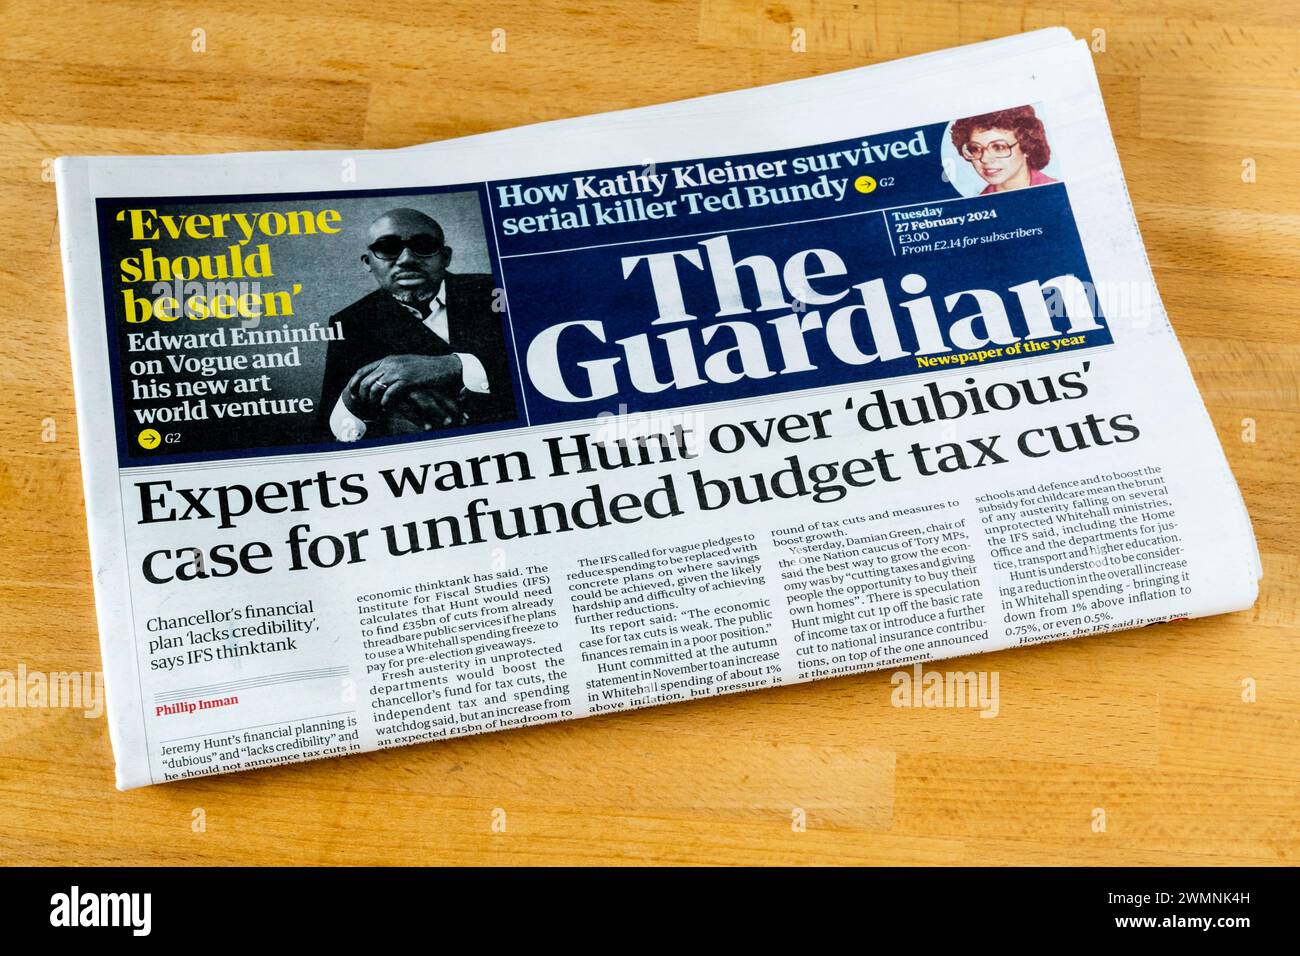 27 Feb 2024. Guardian headline reads: Experts warn Hunt over 'dubious' case for unfunded budget tax cuts. Stock Photo